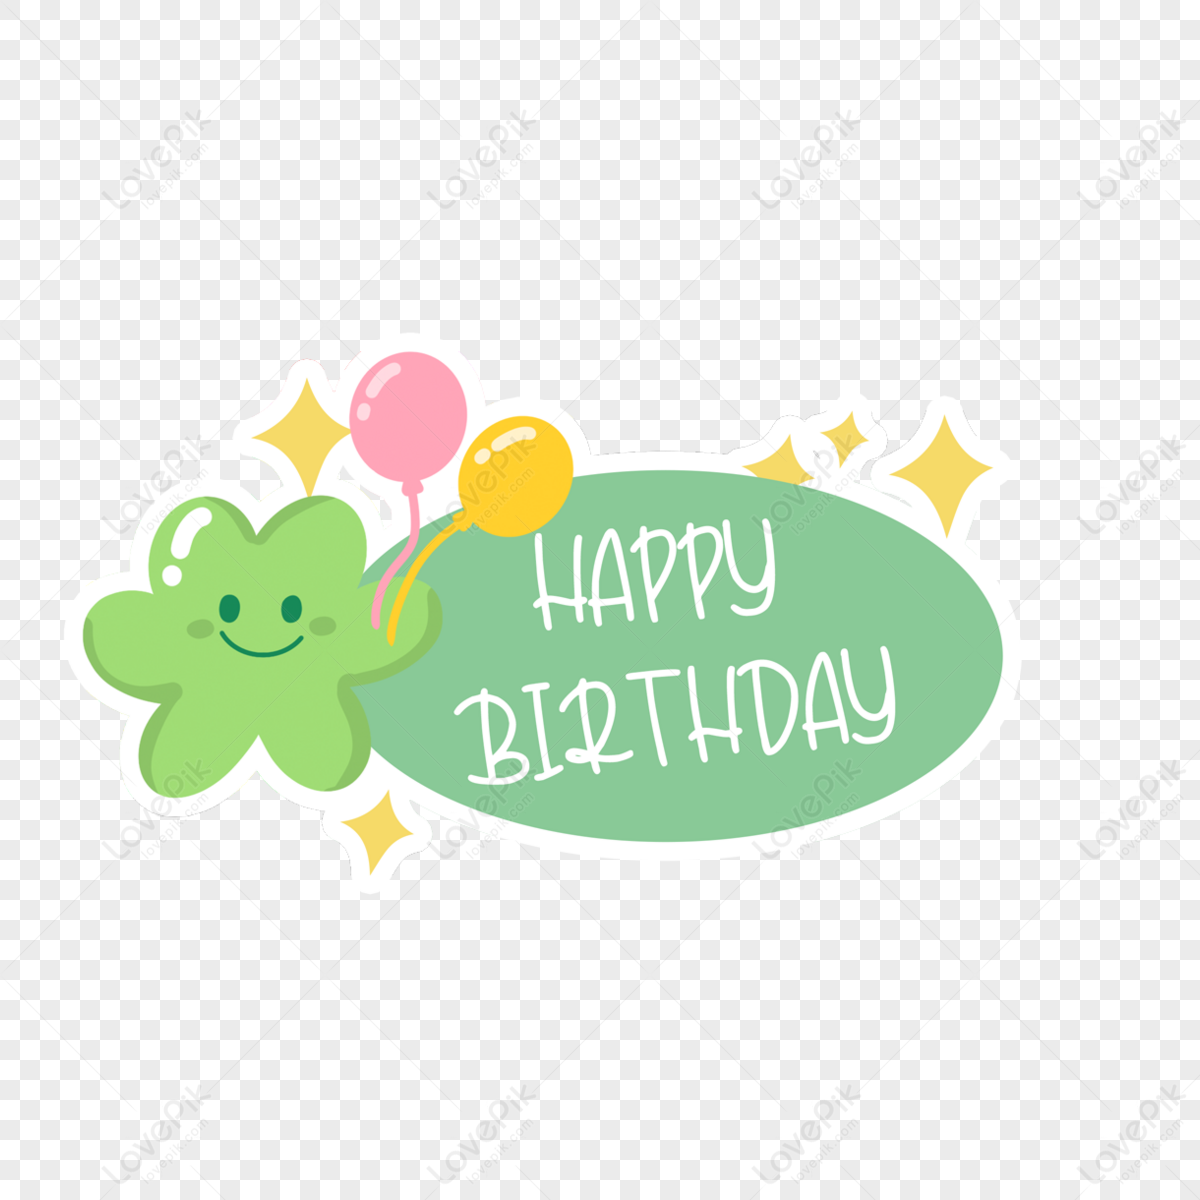 Watercolor Balloons Stickers  イラスト, 誕生日, ふうせん